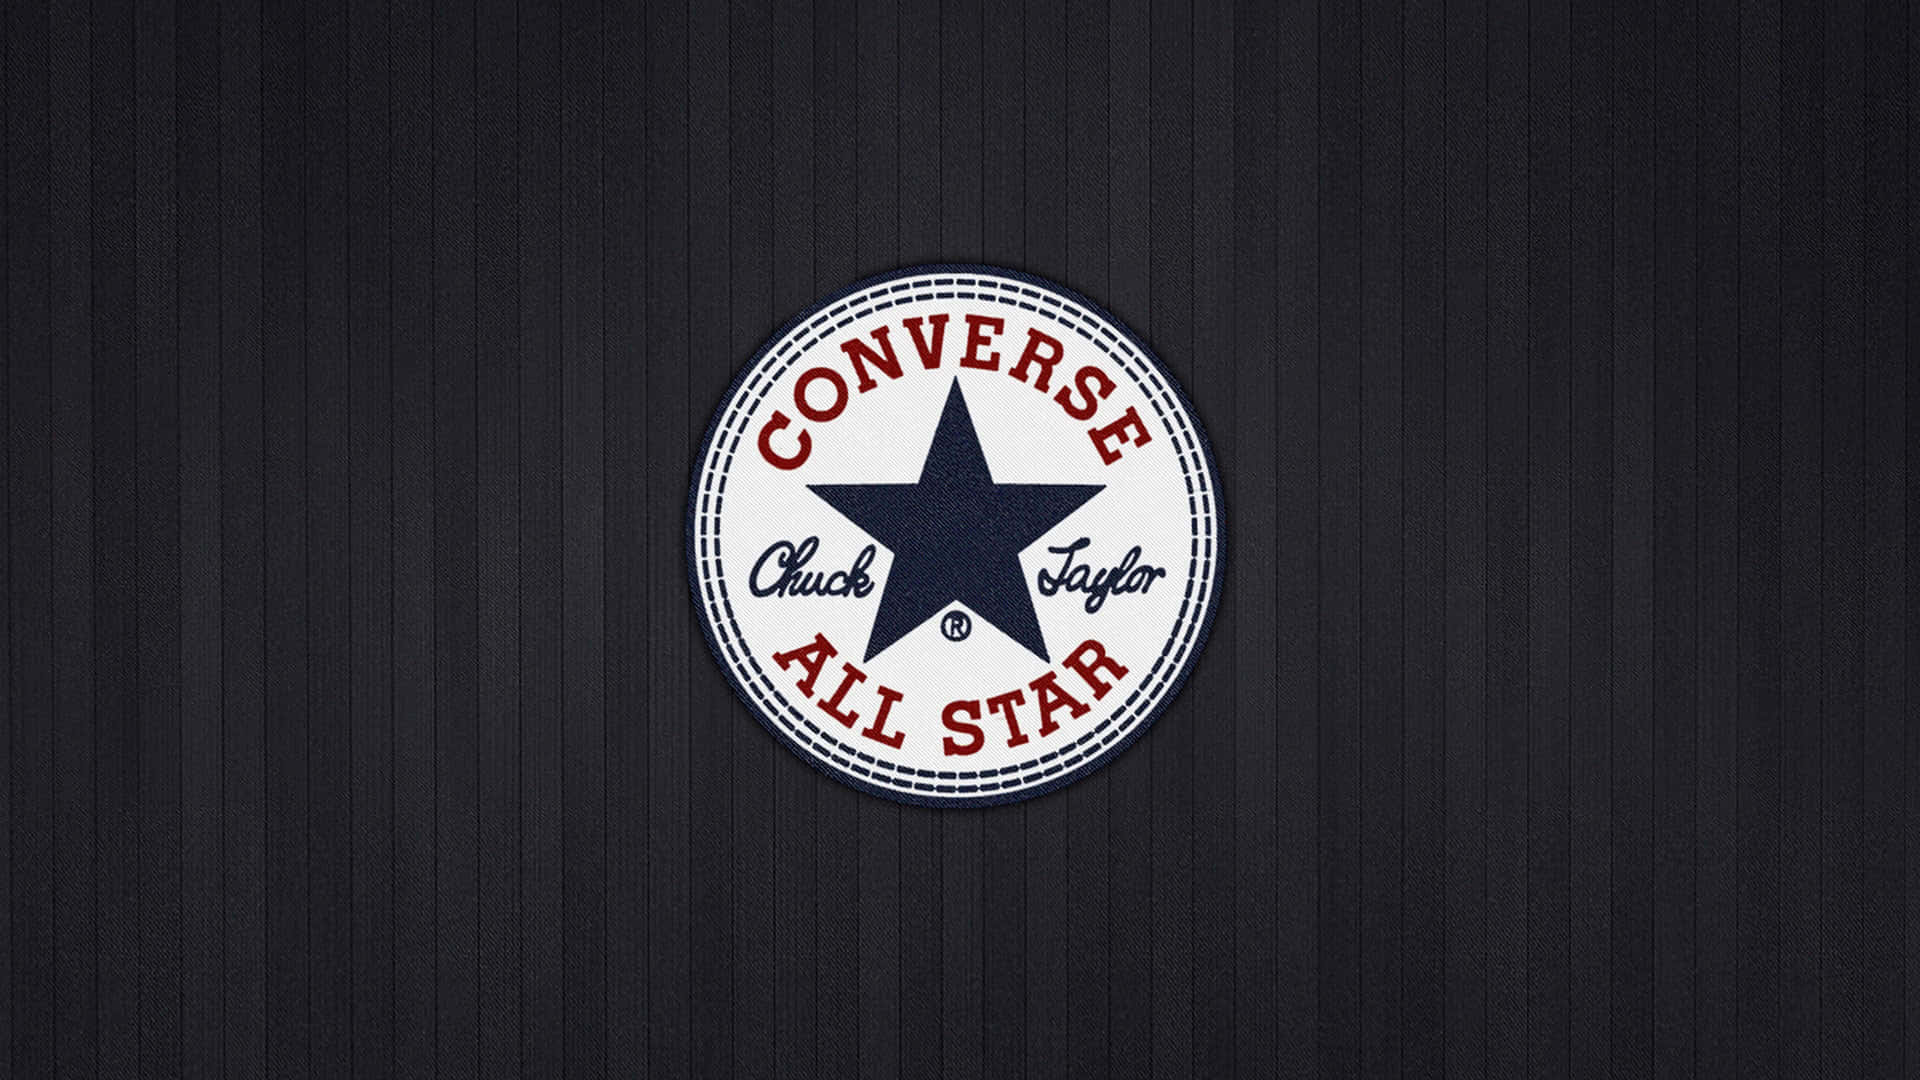 Classic style and timeless design: Converse Logo